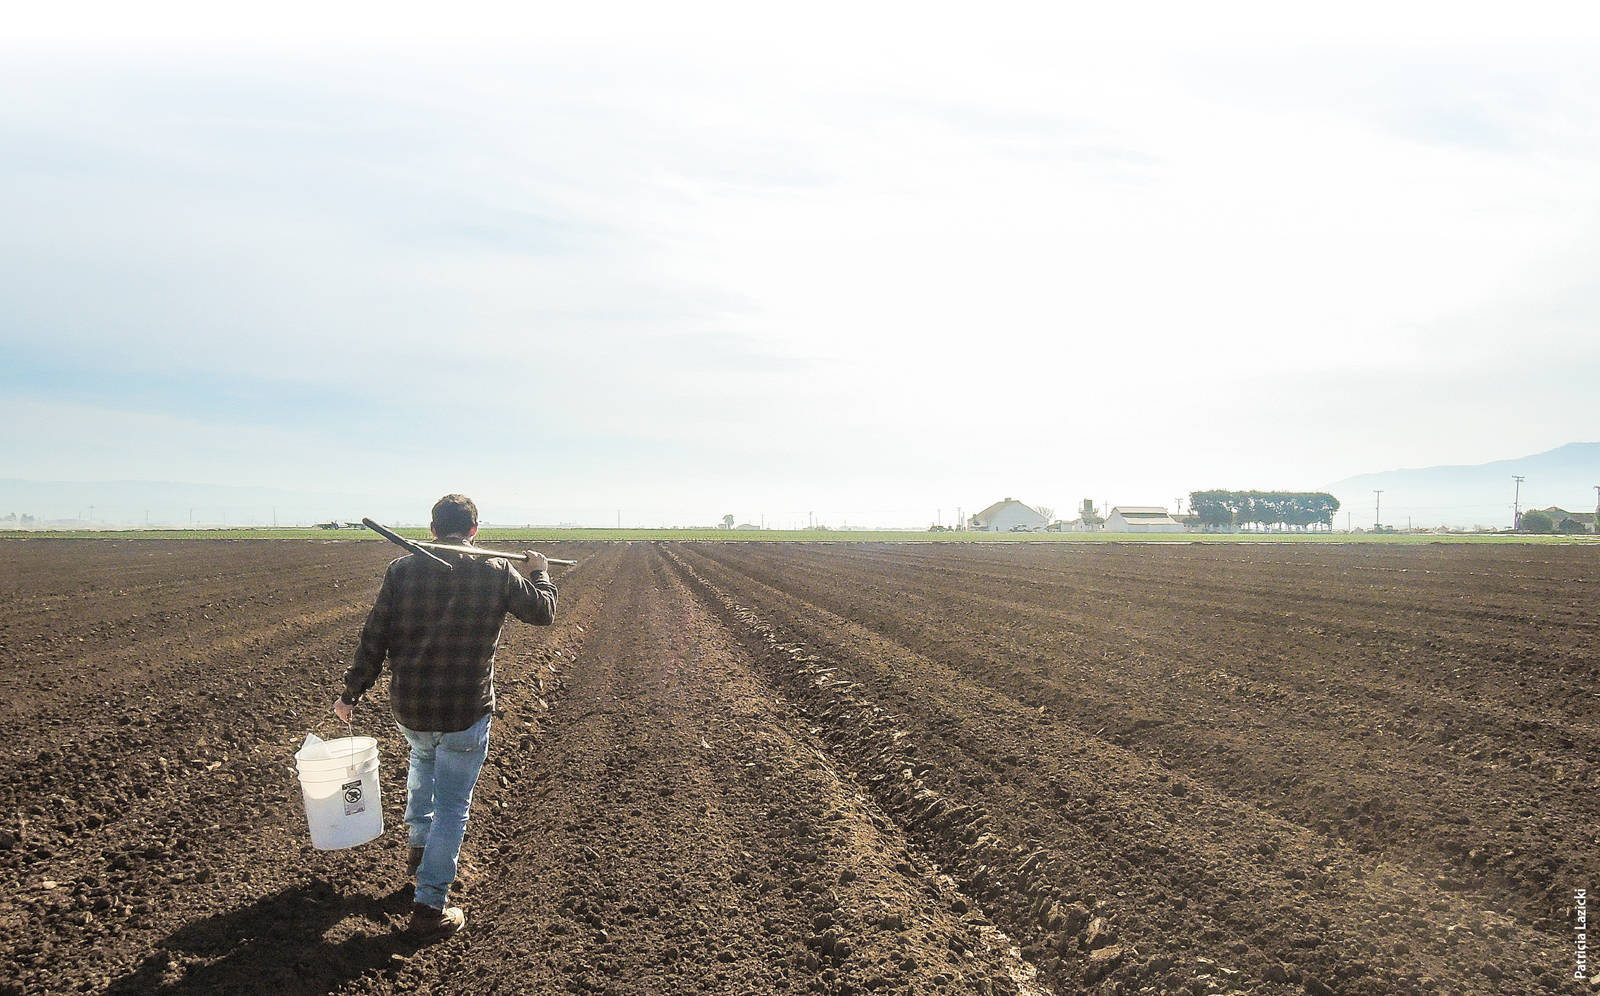 Preplant soil samples should be taken in spring, as closely as possible to a planned fertilizer application and after any pre-irrigation.